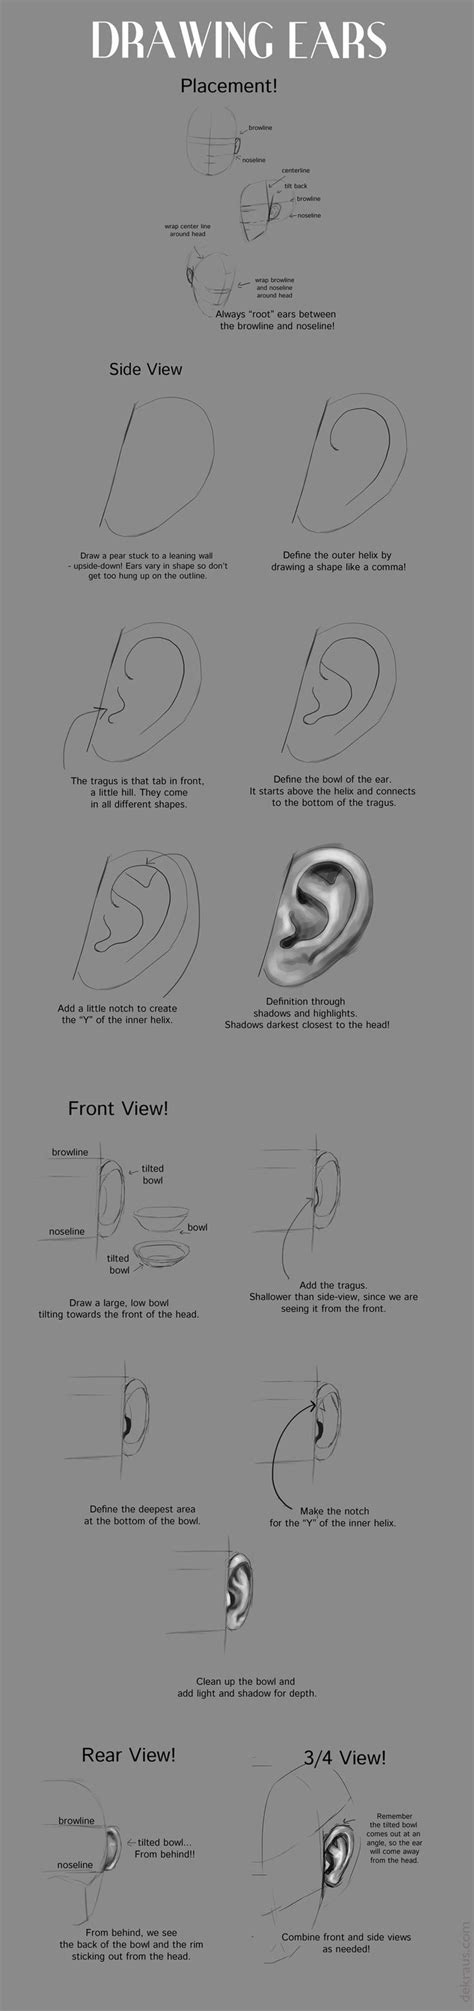 Drawing Ears Tutorial By Banjodi On Deviantart How To Draw Ears Face